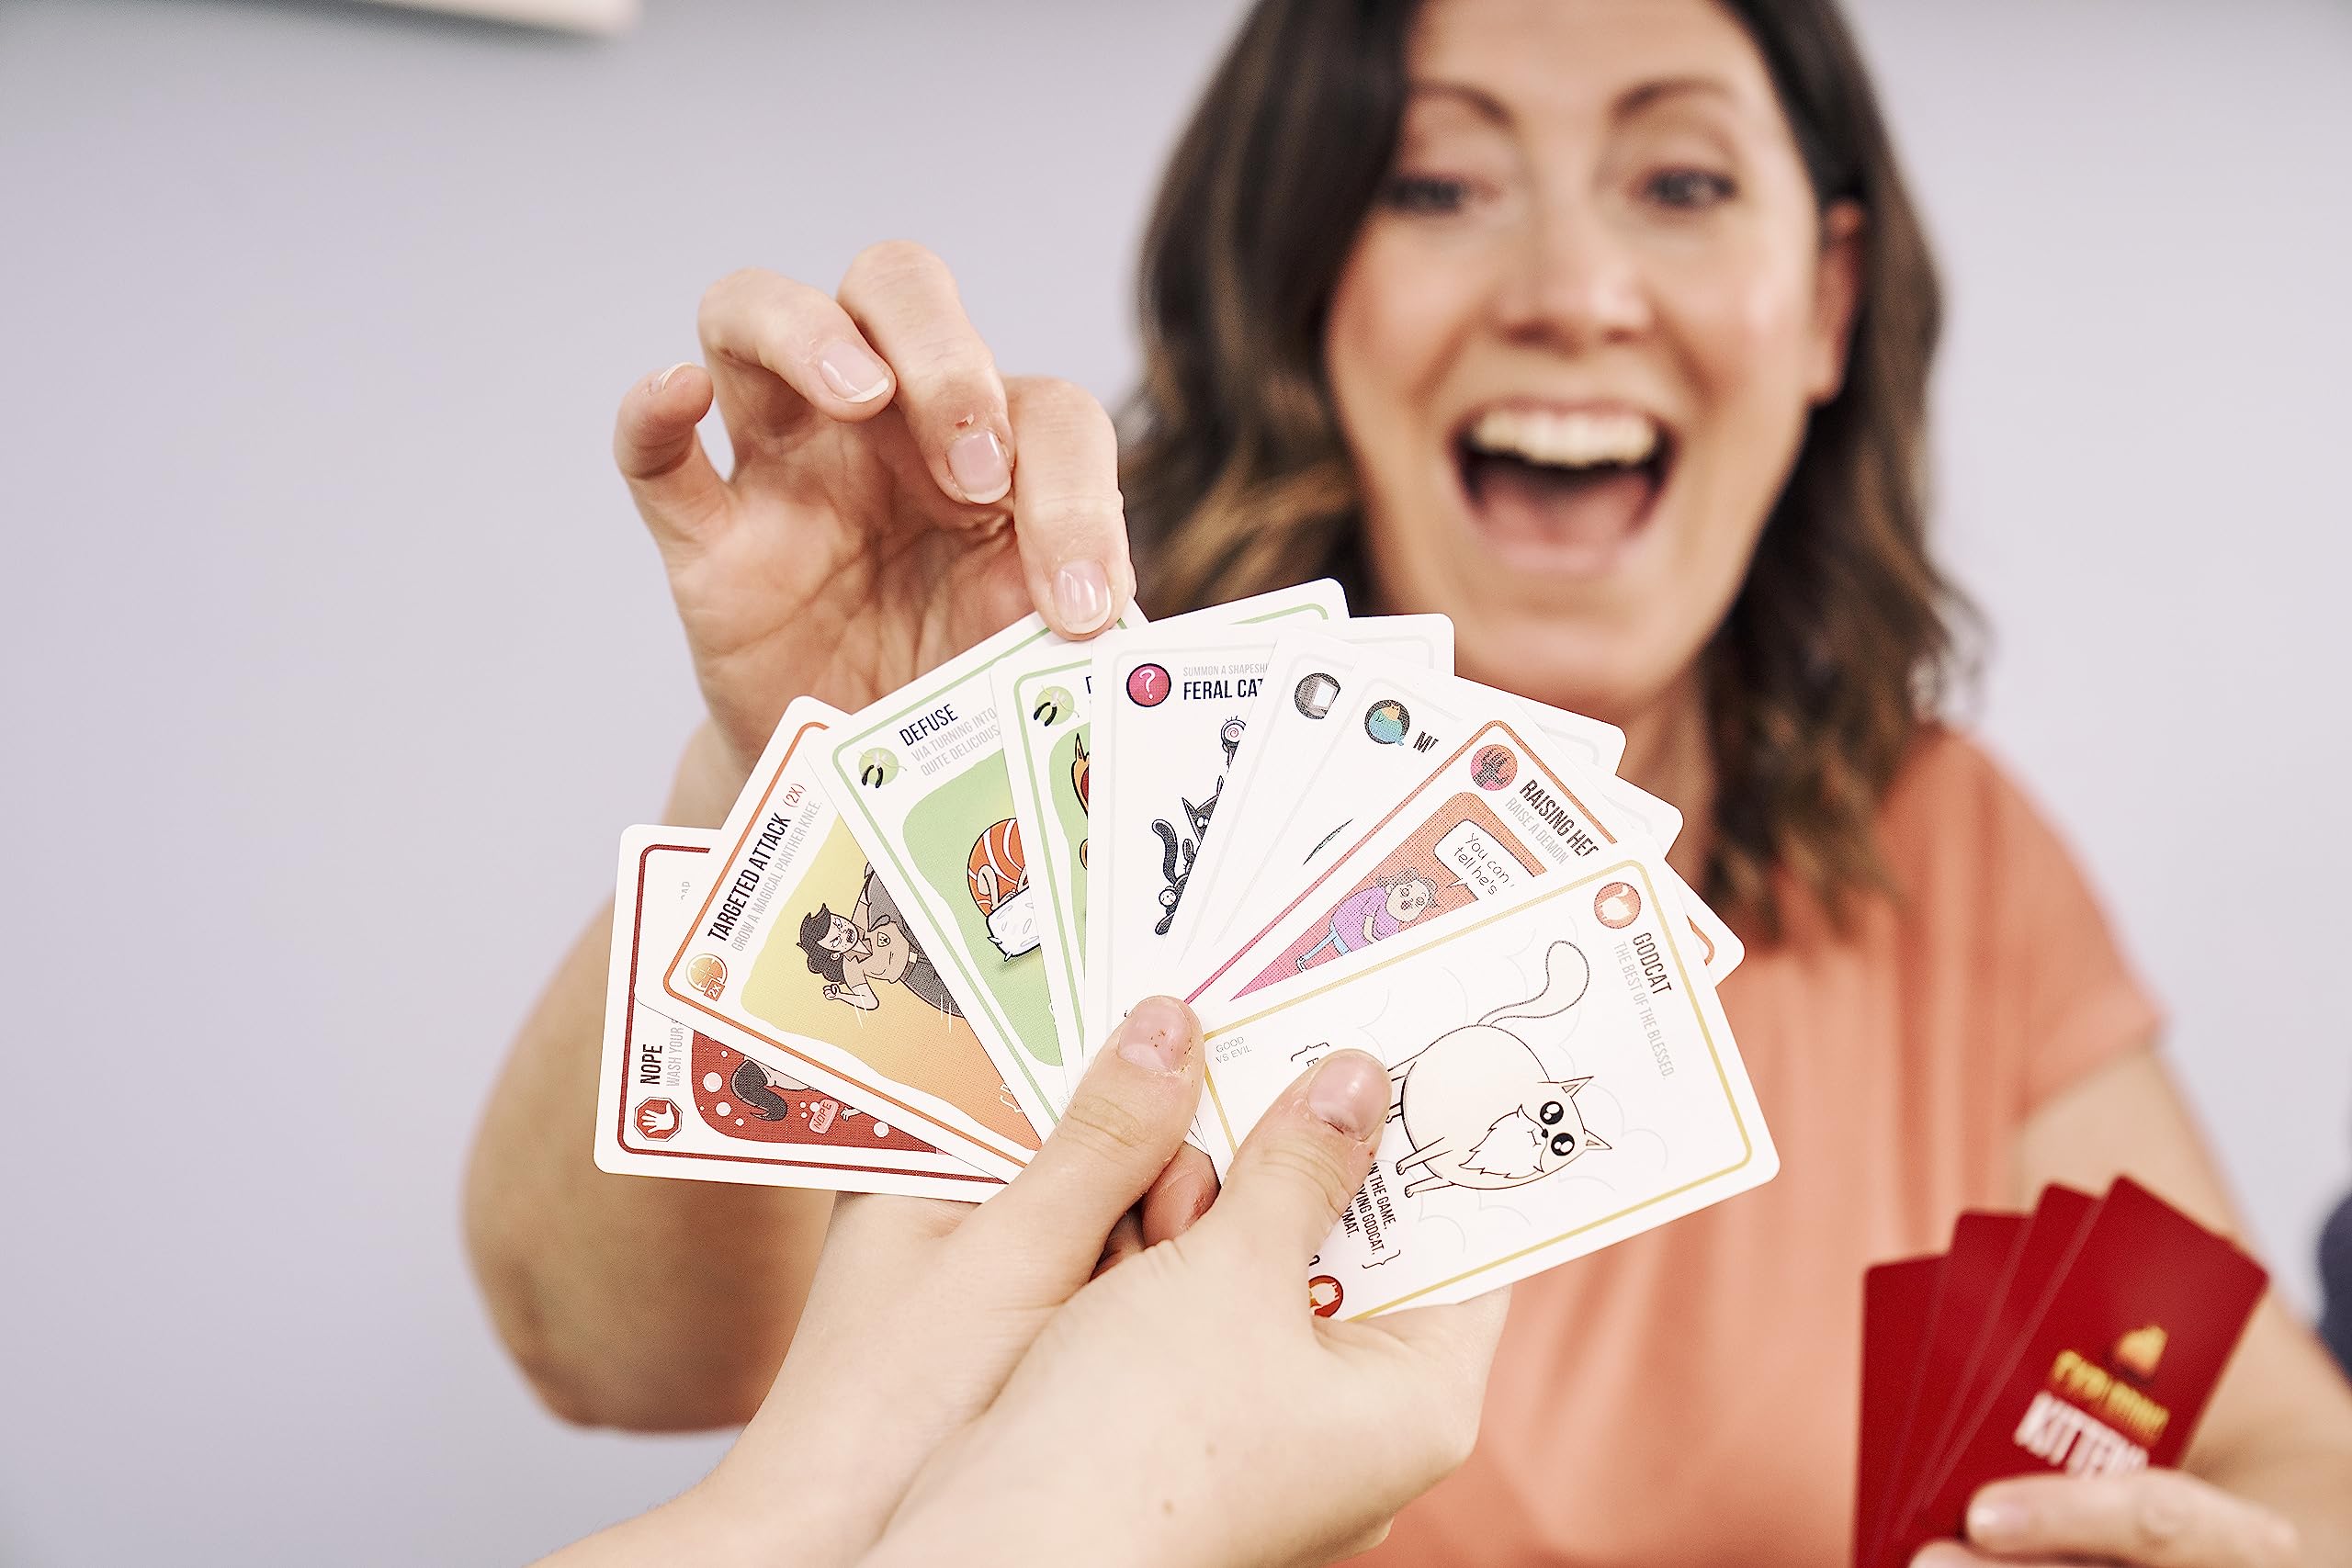 Exploding Kittens Good vs. Evil - 55 Cards Inspired by The Netflix Series - Elevate Exploding Kittens with New Characters - Family Games for Kids and Adults - Funny Card Games for Hours of Gameplay